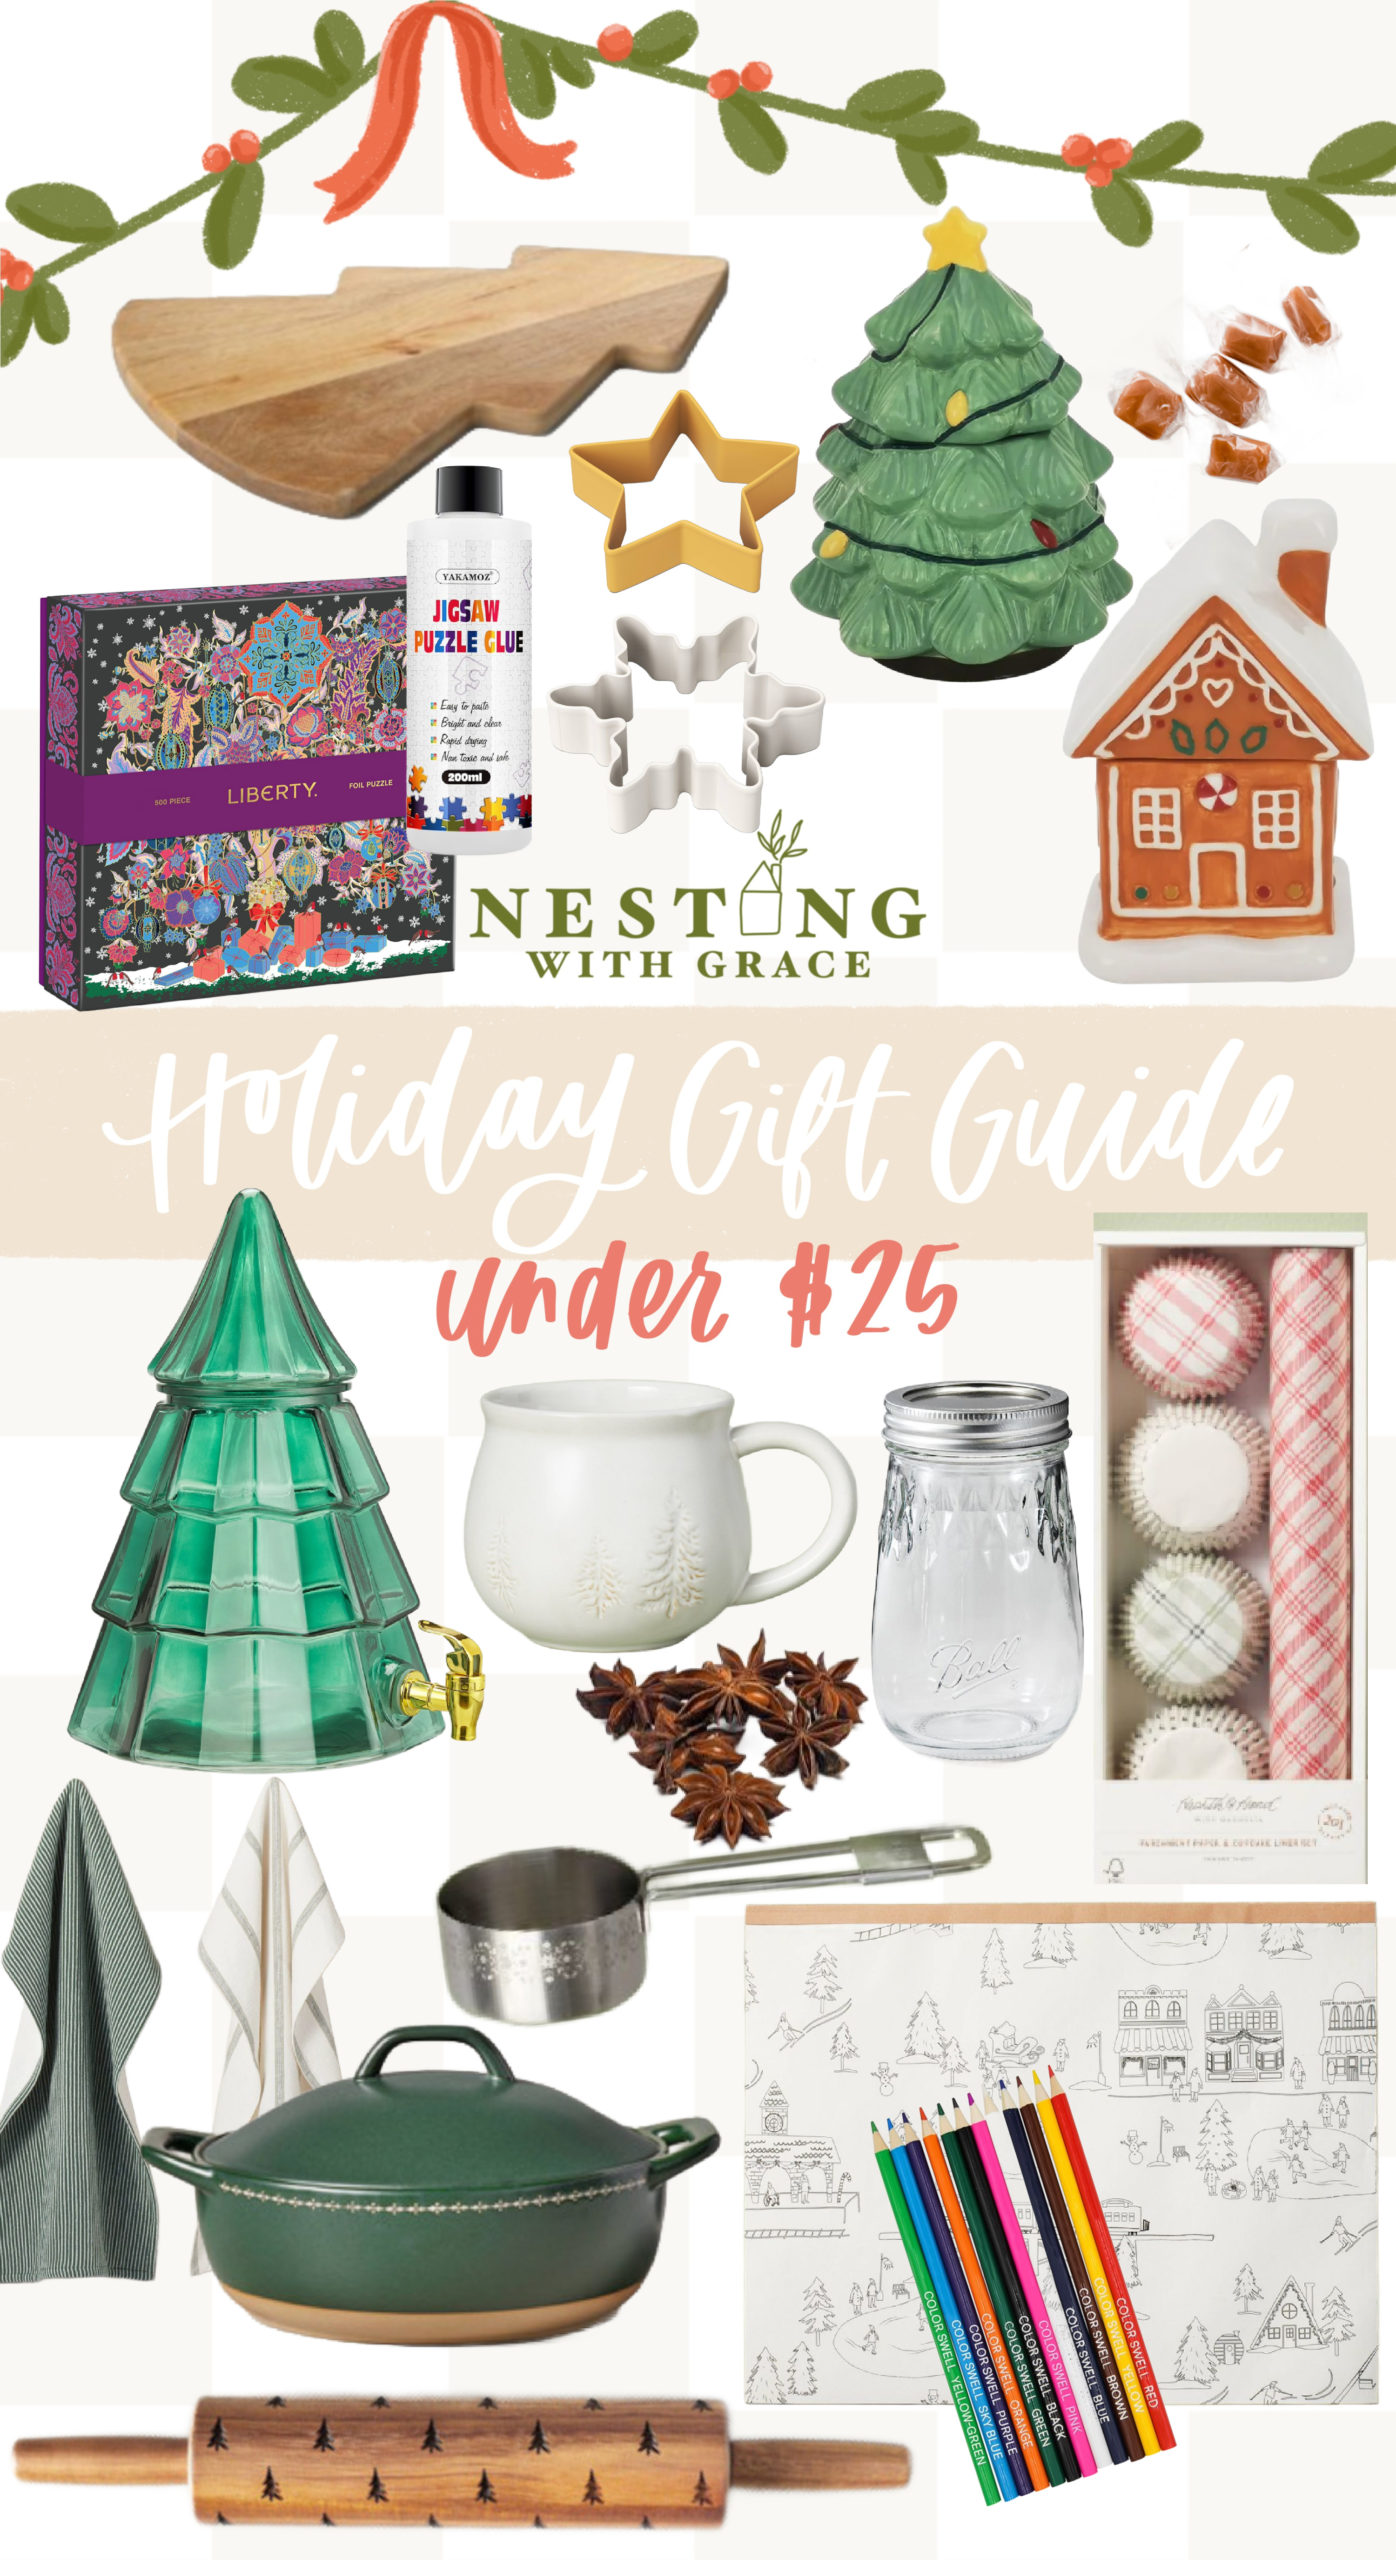 25 Fun & Simple Gifts for Neighbors this Christmas